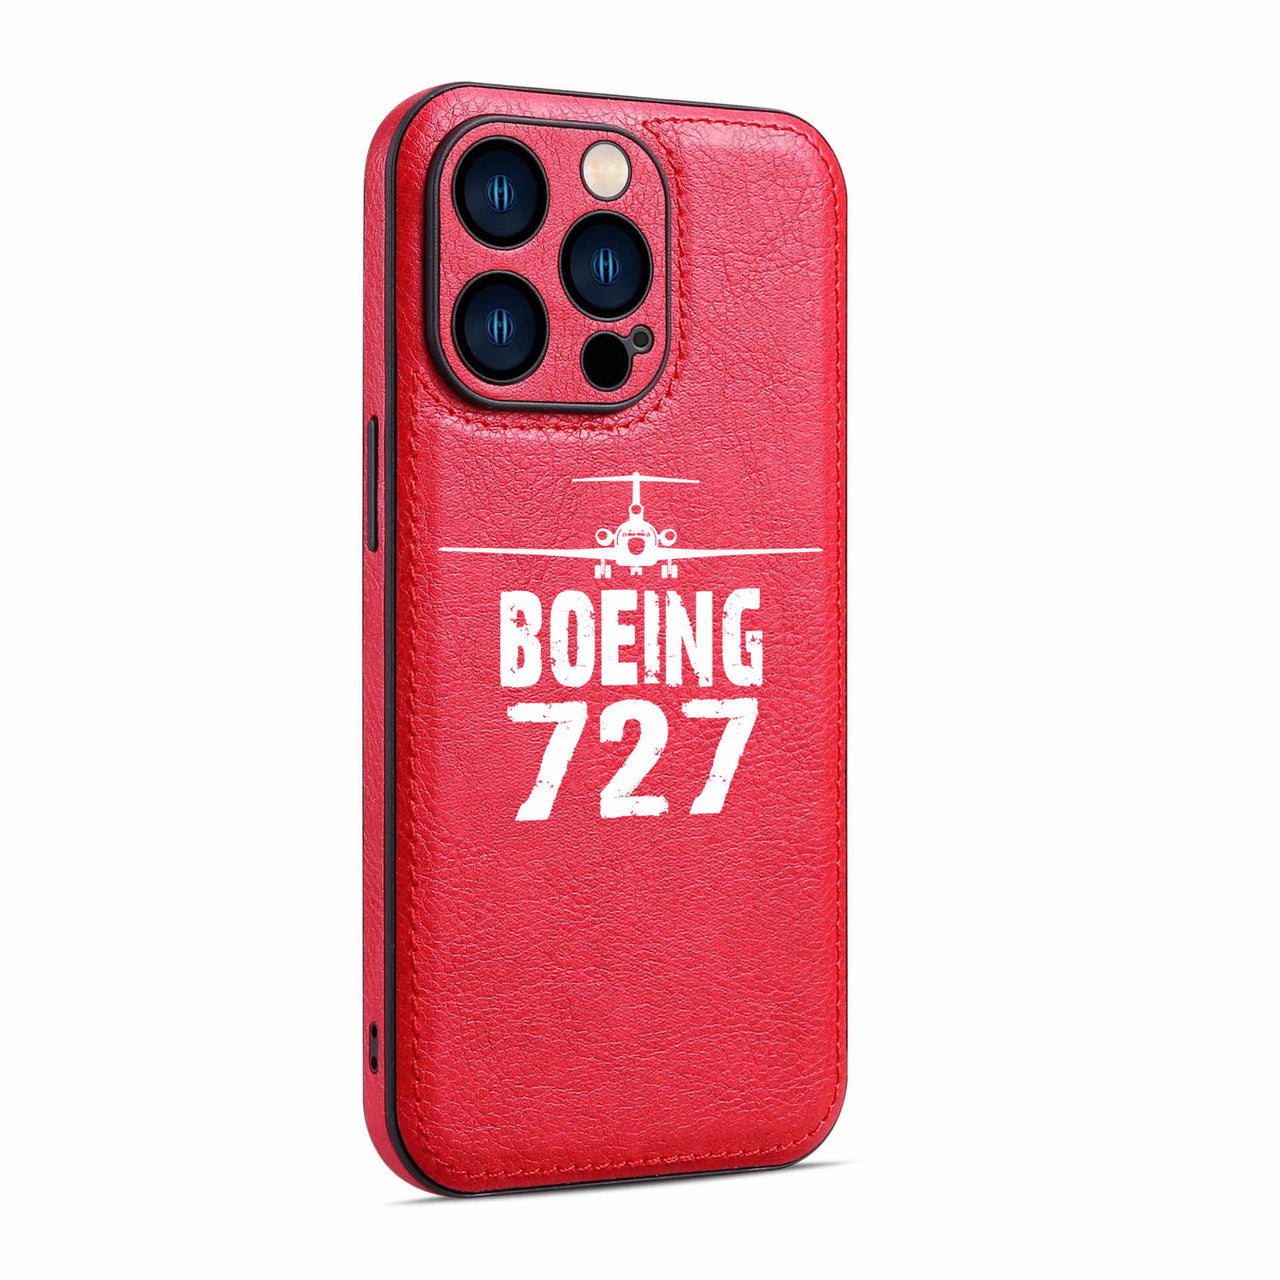 Boeing 727 & Plane Designed Leather iPhone Cases